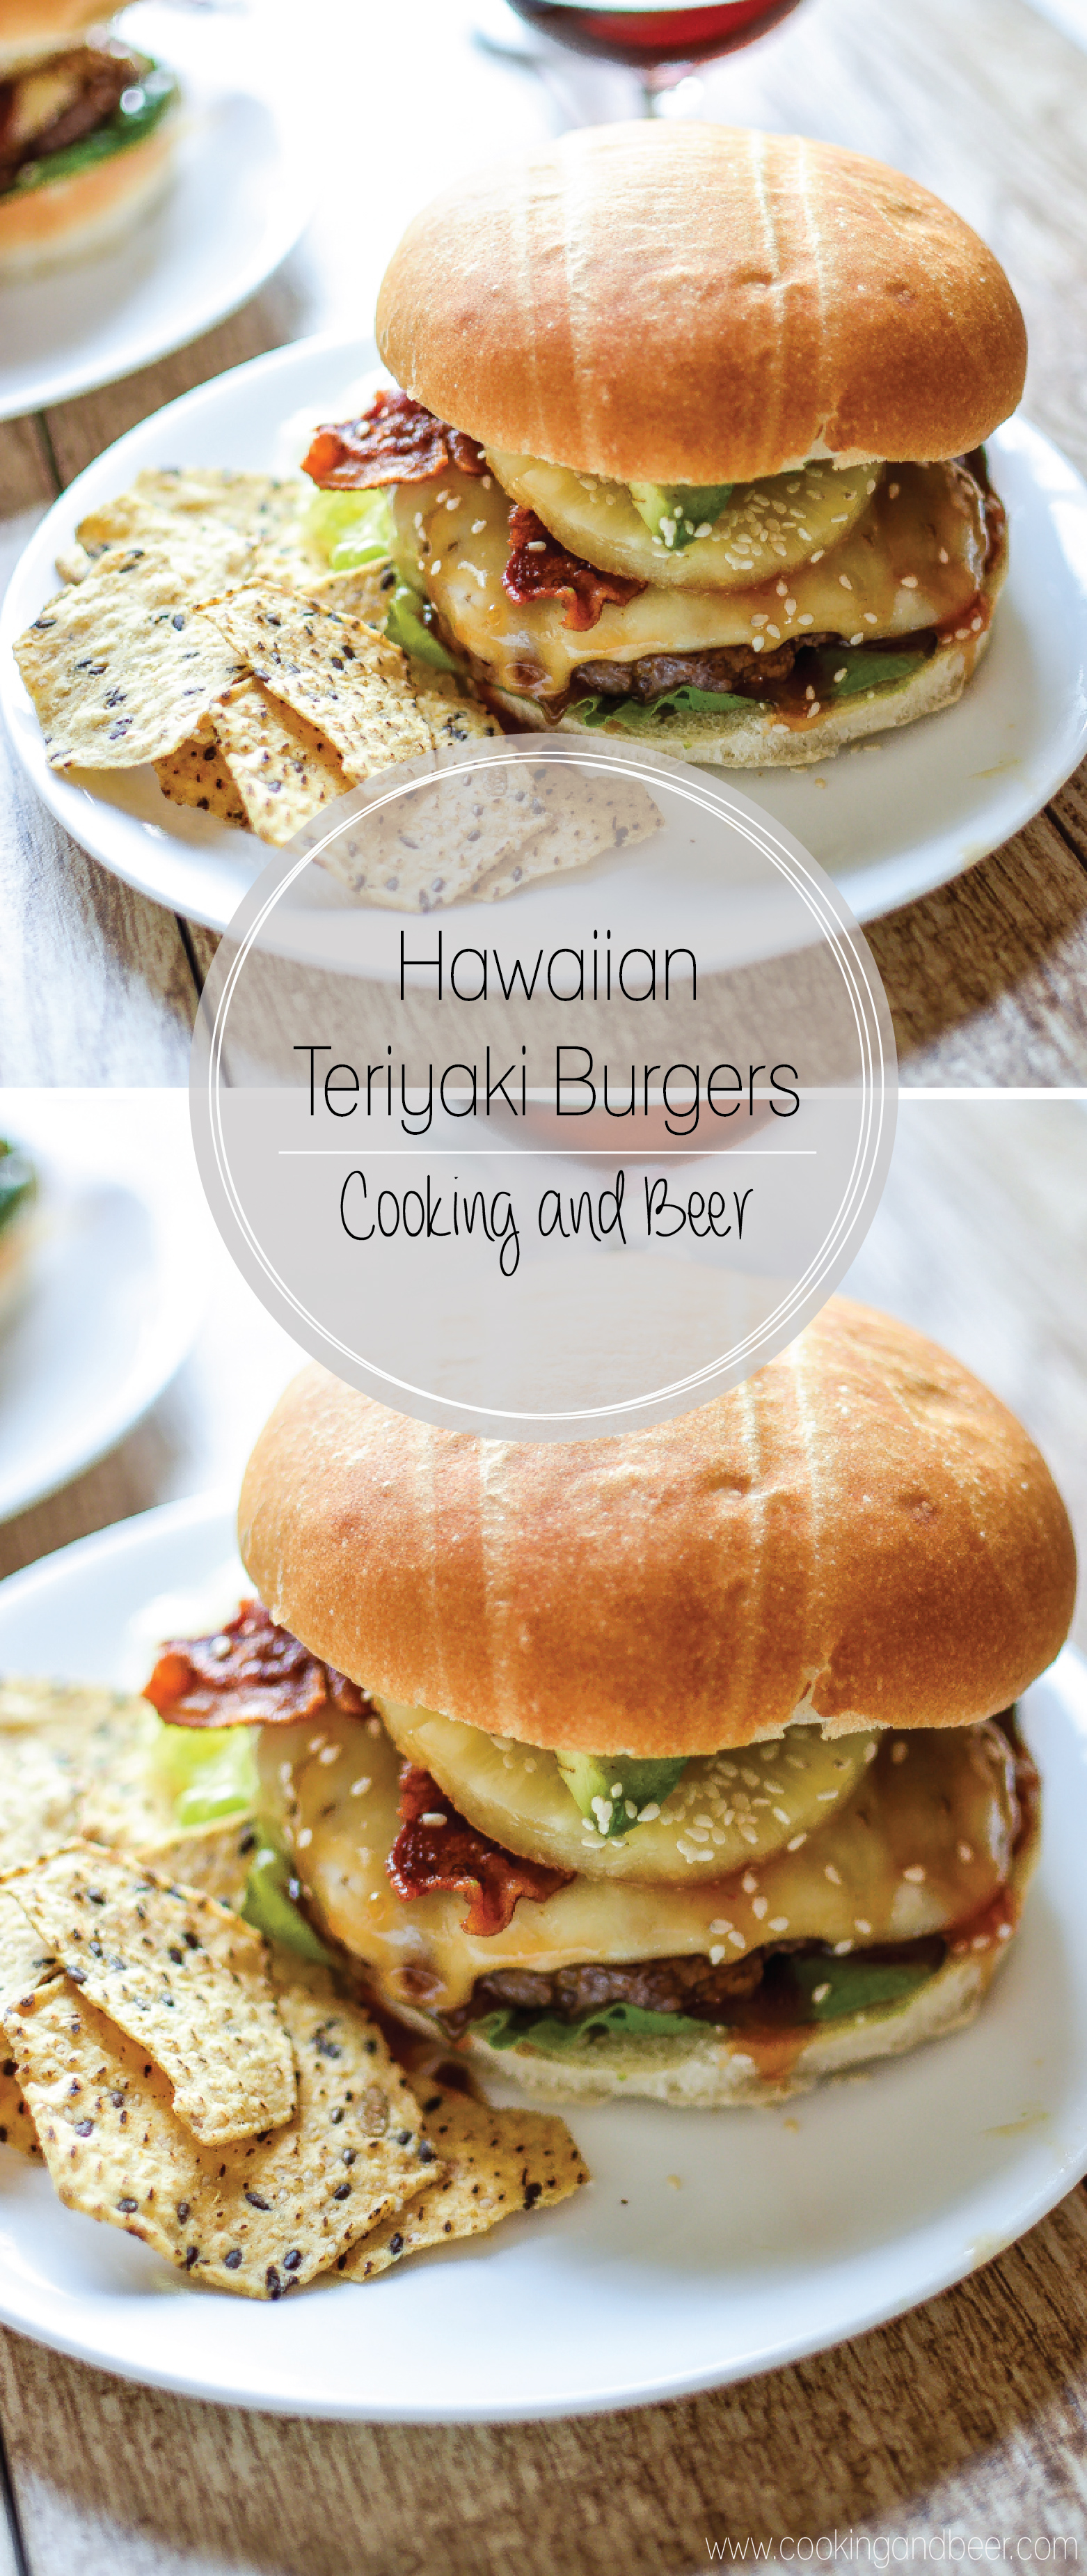 Hawaiian Teriyaki Burgers are a dinner recipe that needs to be added to your weekly menu!